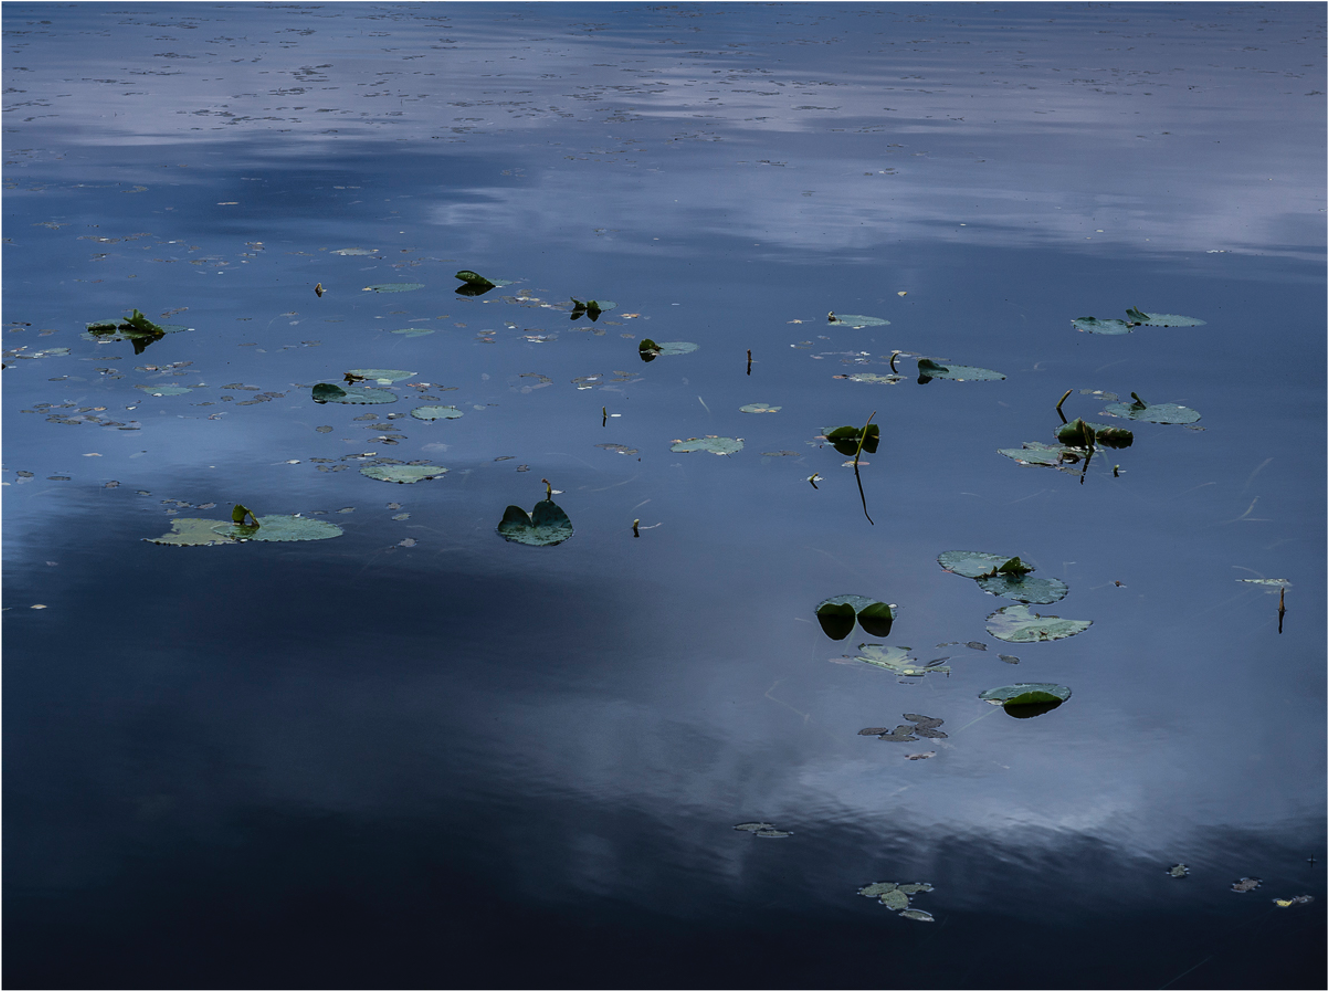 Rippled pond with lilly pads